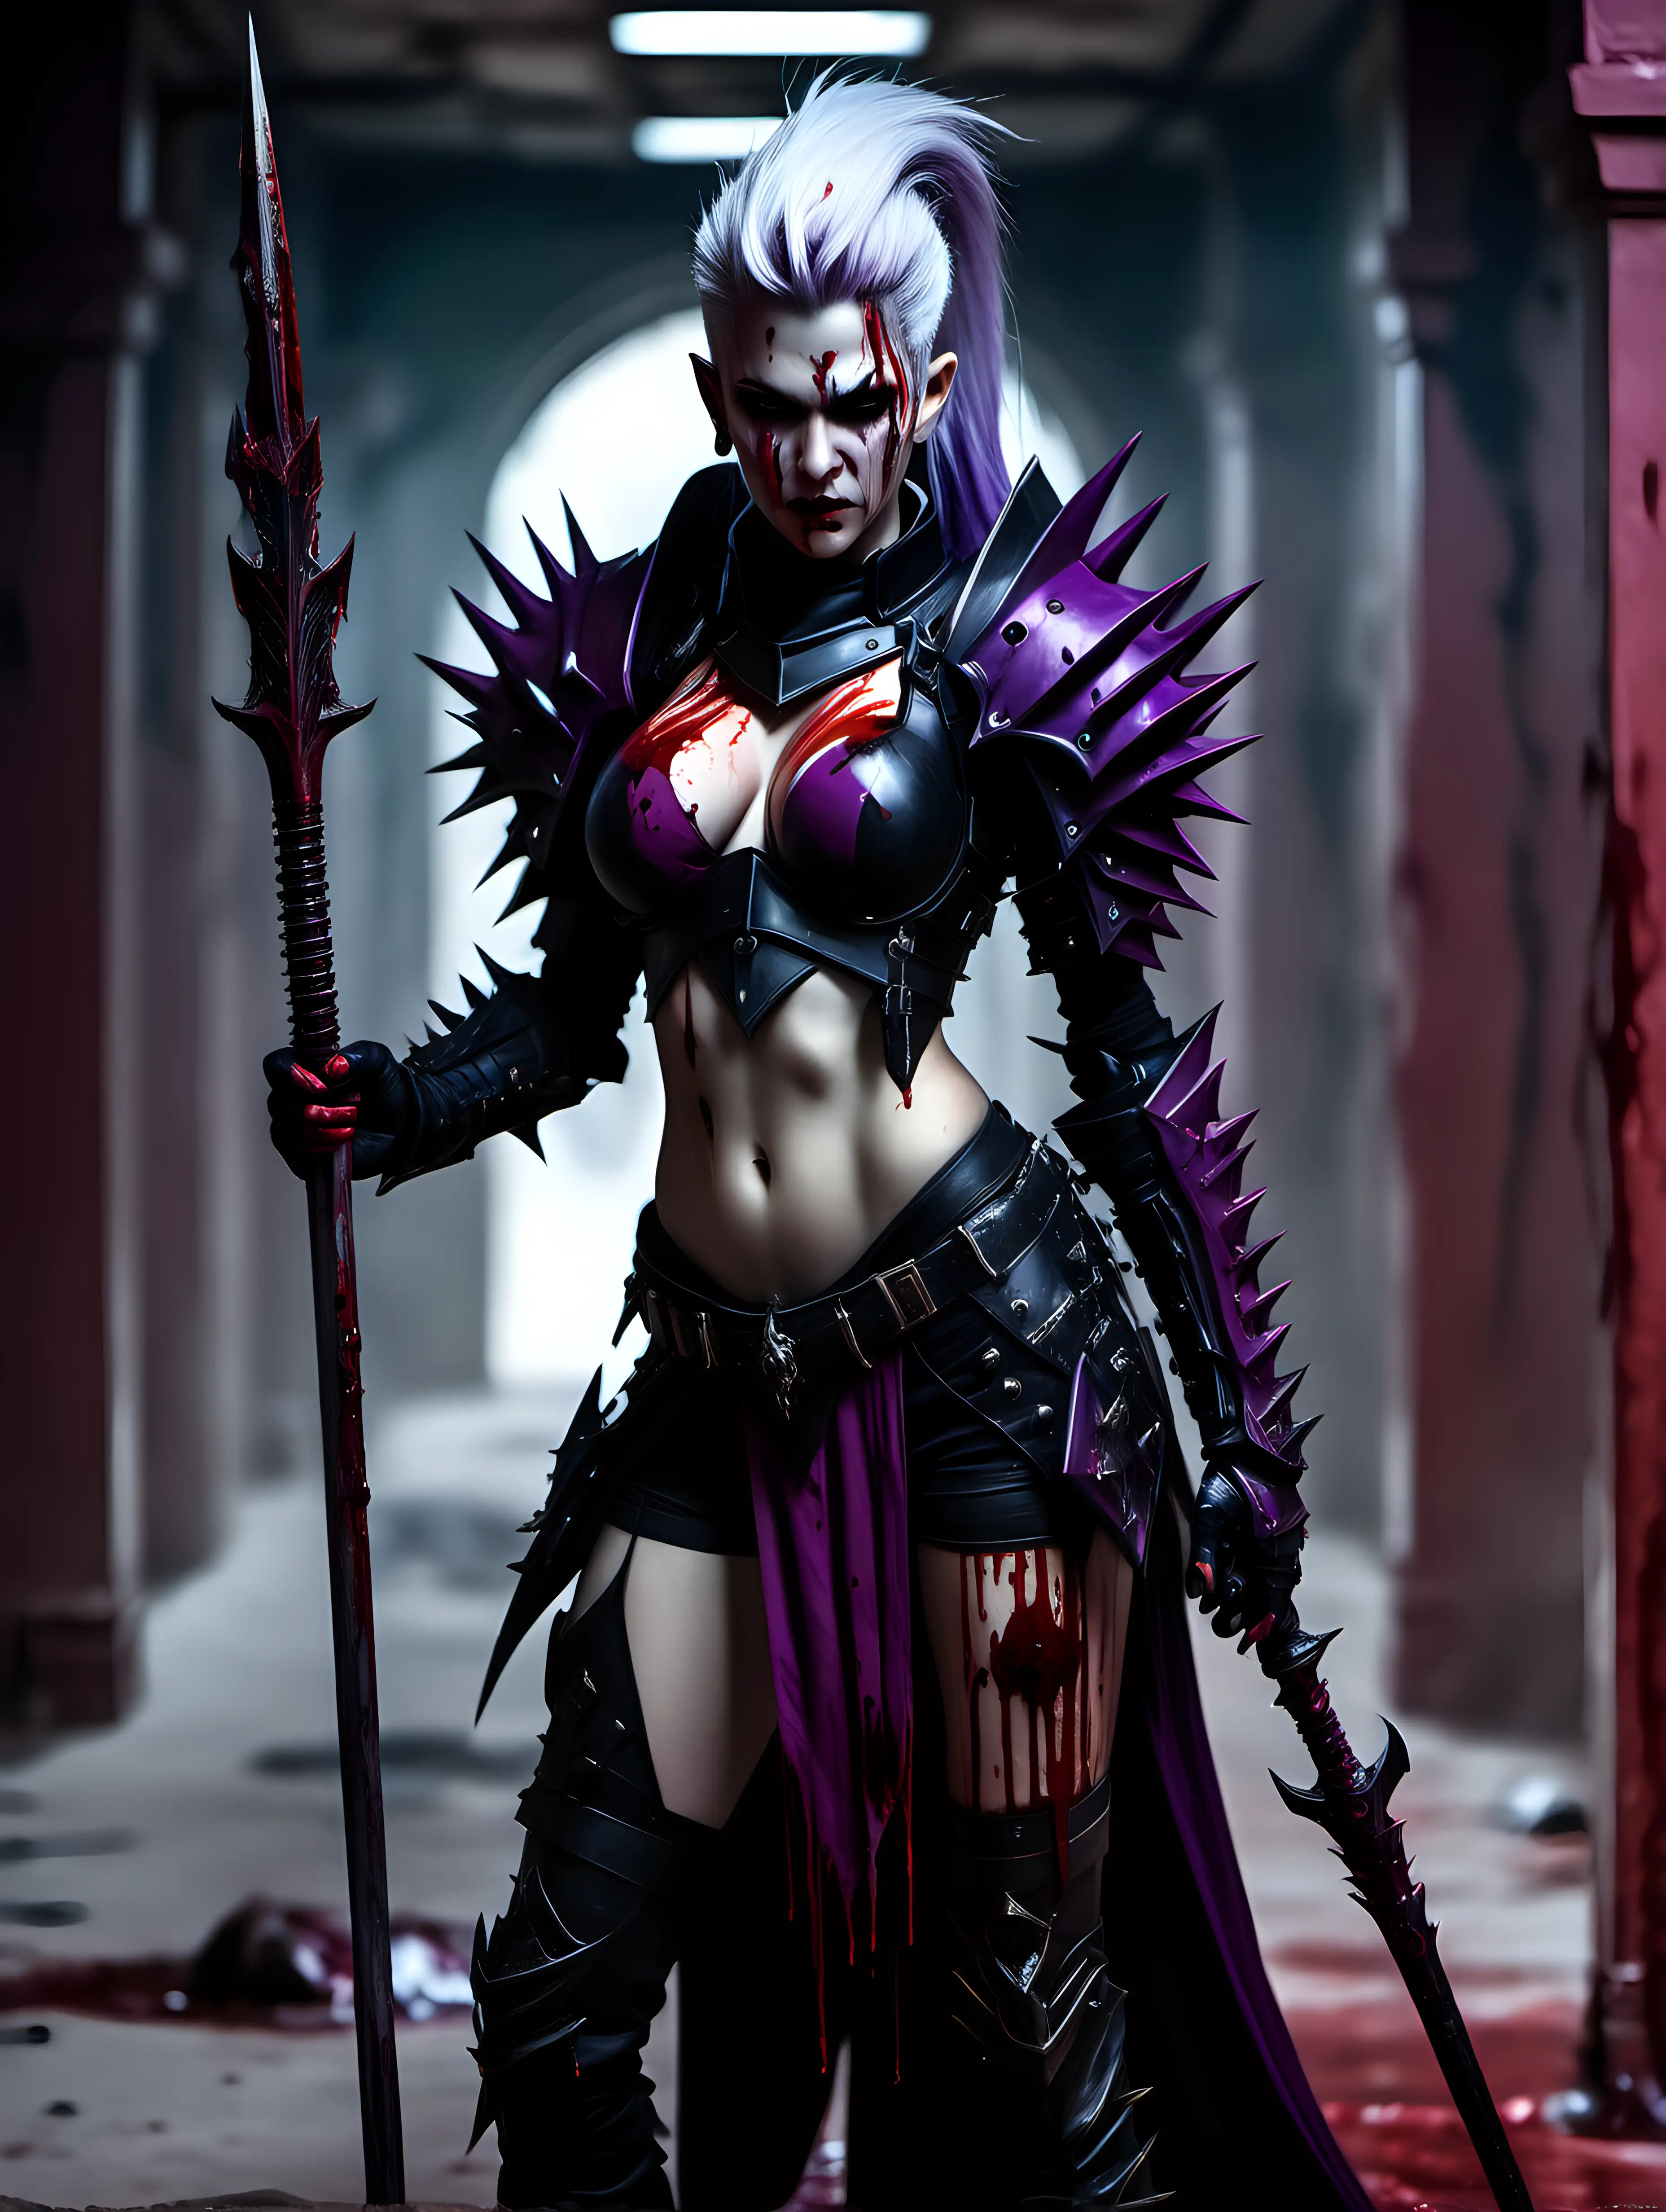 Portrait of drukhari female standing with a spear with blood dripping from the tip of the spear.
Wears elegant heavy spiky black and purple armor. Dark eyes. White hair.
Standing in an relaxed pose. intense look on face.
Bloodred corridor in background of image.